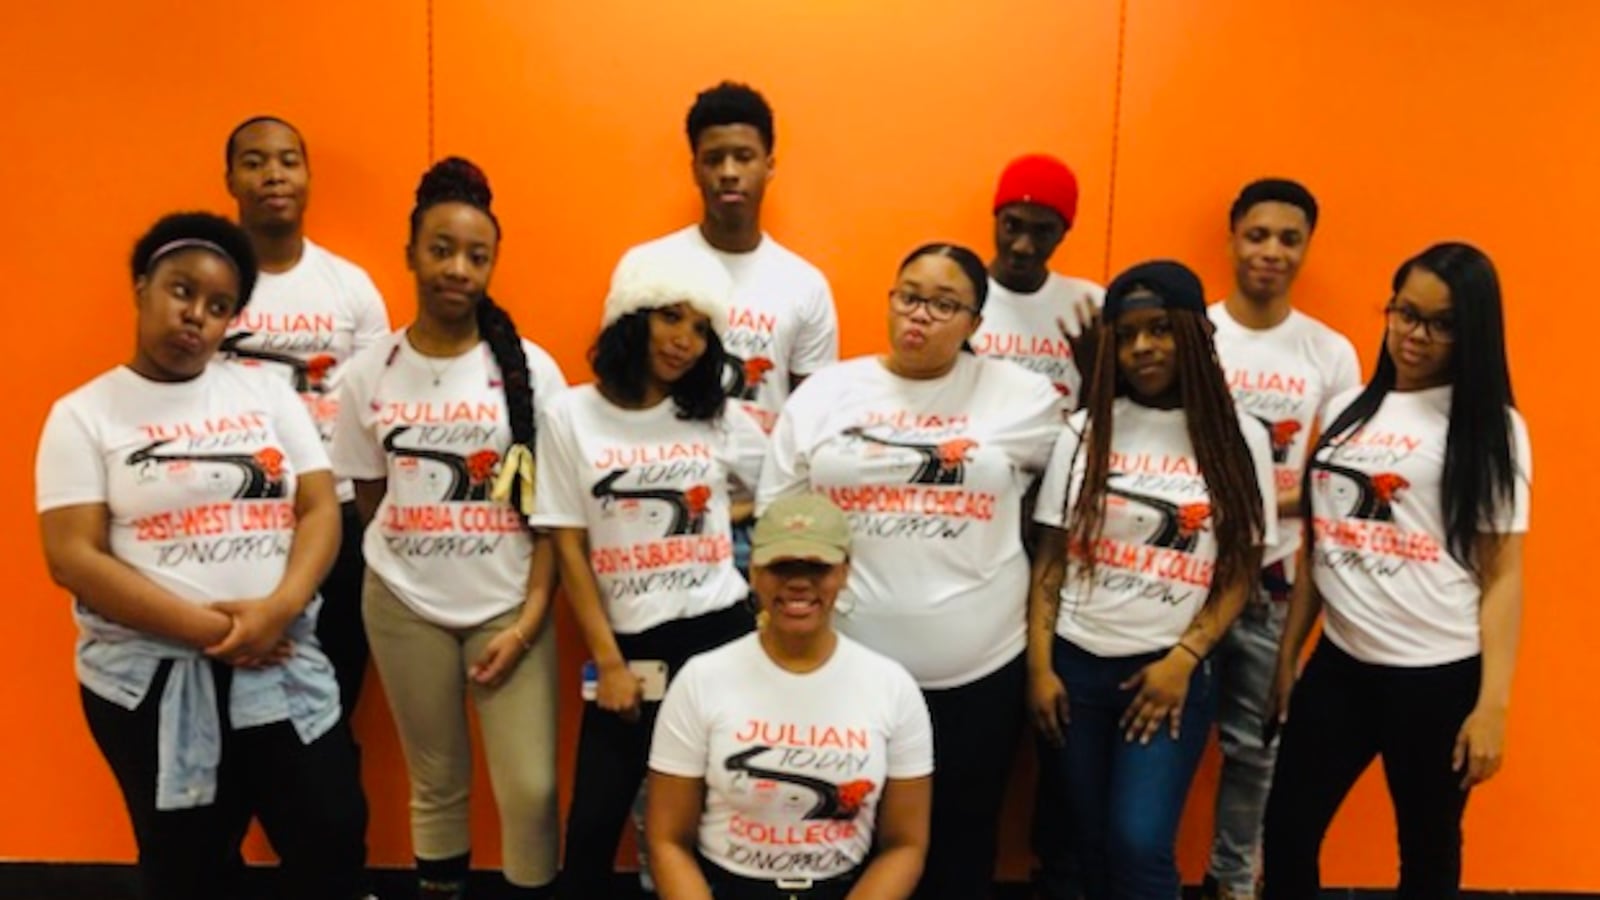 Dominicca Washington and her students at Julian High School in Chicago.